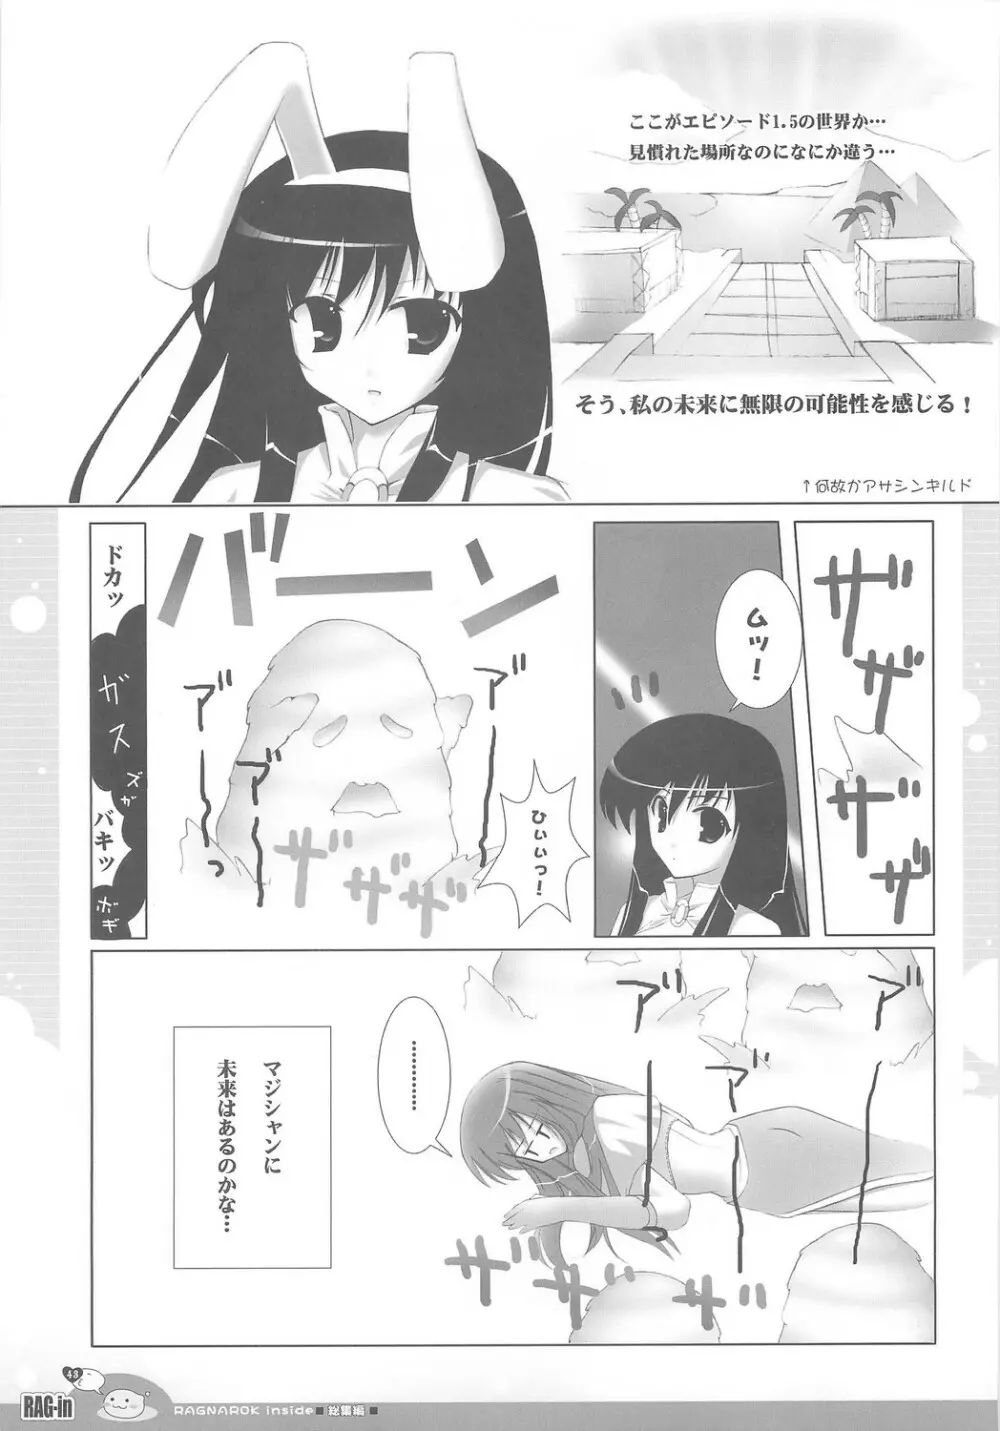 RAG-in 1～10 総集編 Page.47